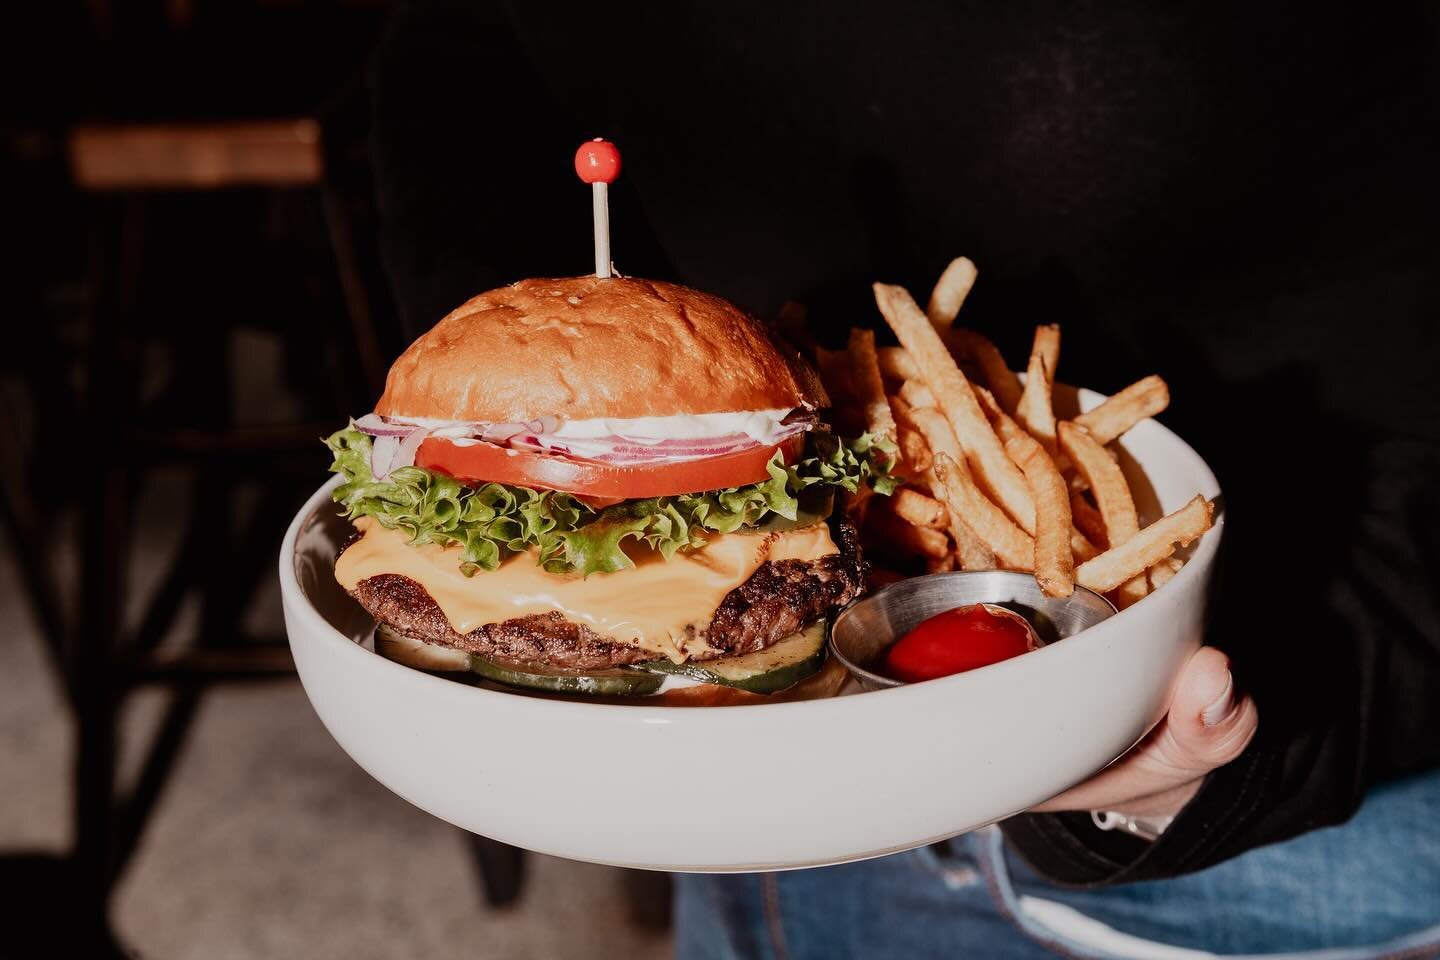 Austin has no shortage of outstanding bar burgers and for more than 12 years, we&rsquo;ve been sure to keep our 🍔 game strong. We&rsquo;ve got a few new fun mods for you this season just to keep your tastebuds on their toes. And - for our plant-powe